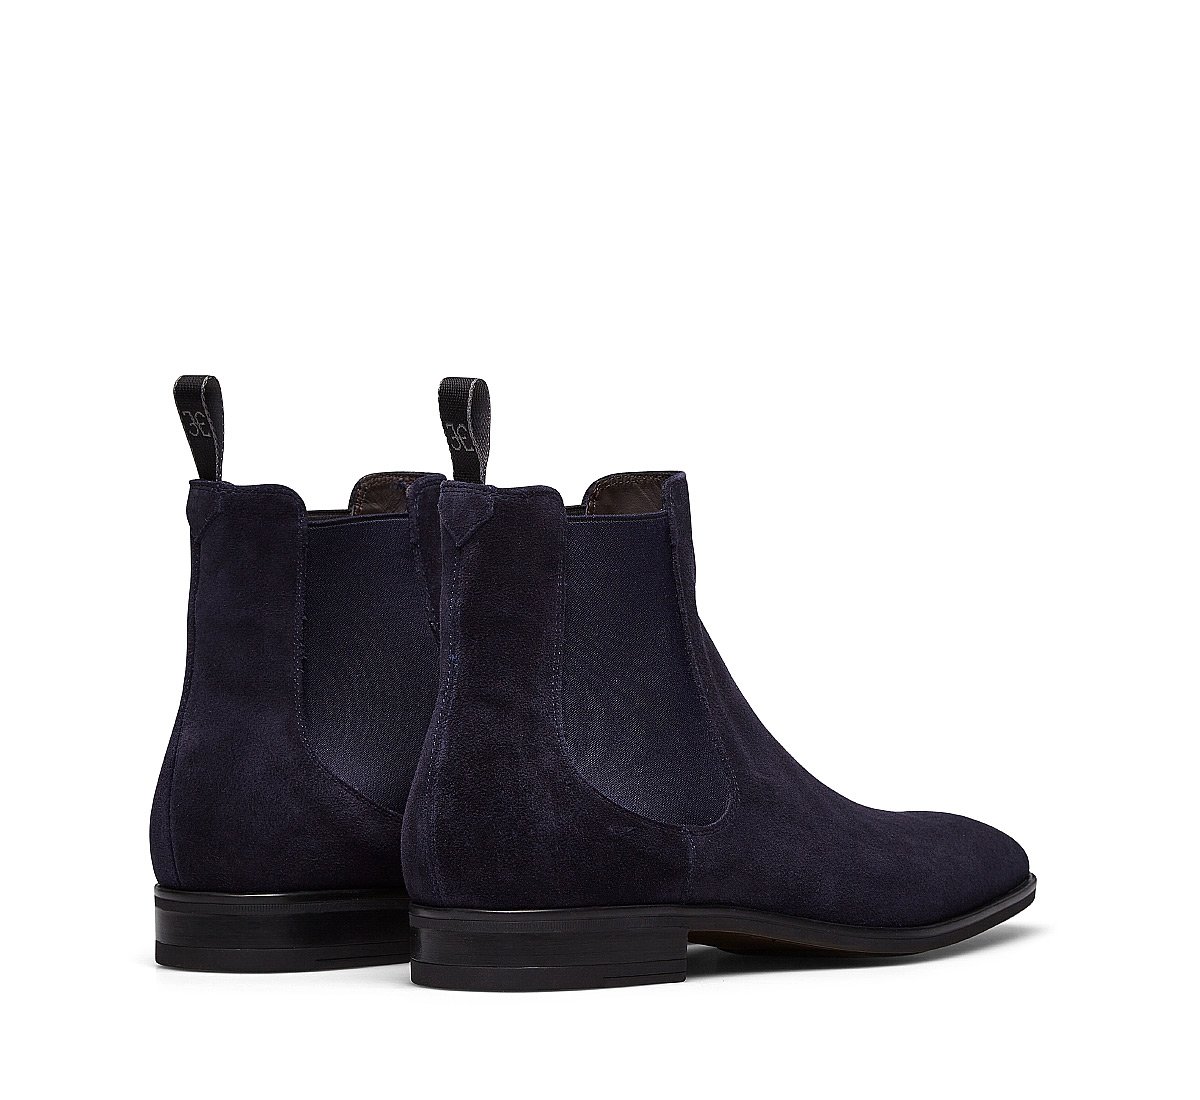 Suede Beatle boots